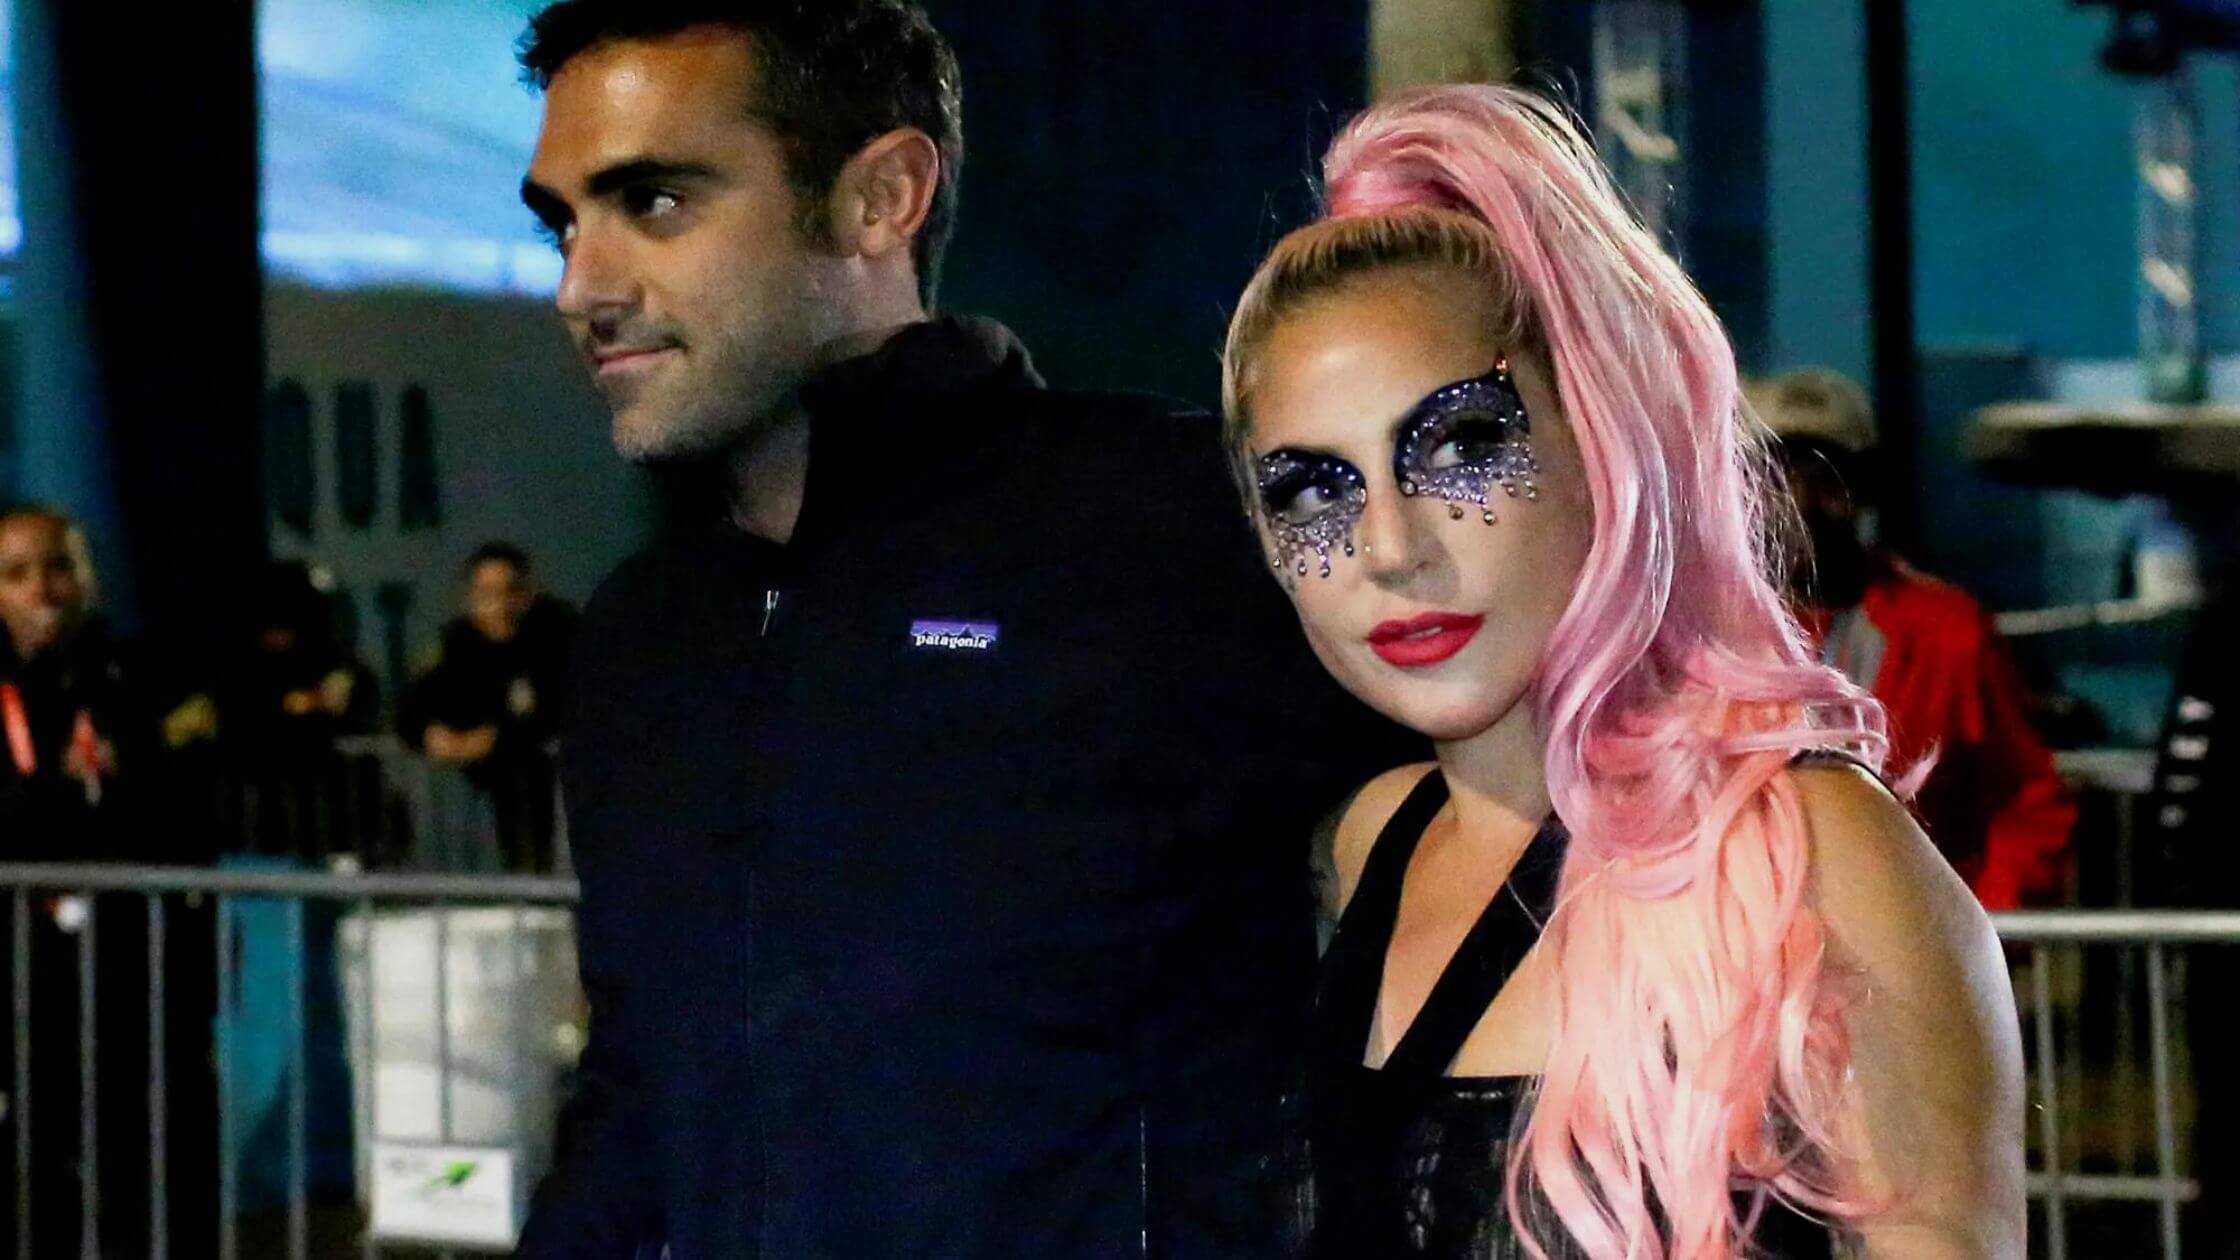 What Happened To Lady Gaga's Relationship With Michael Polansky